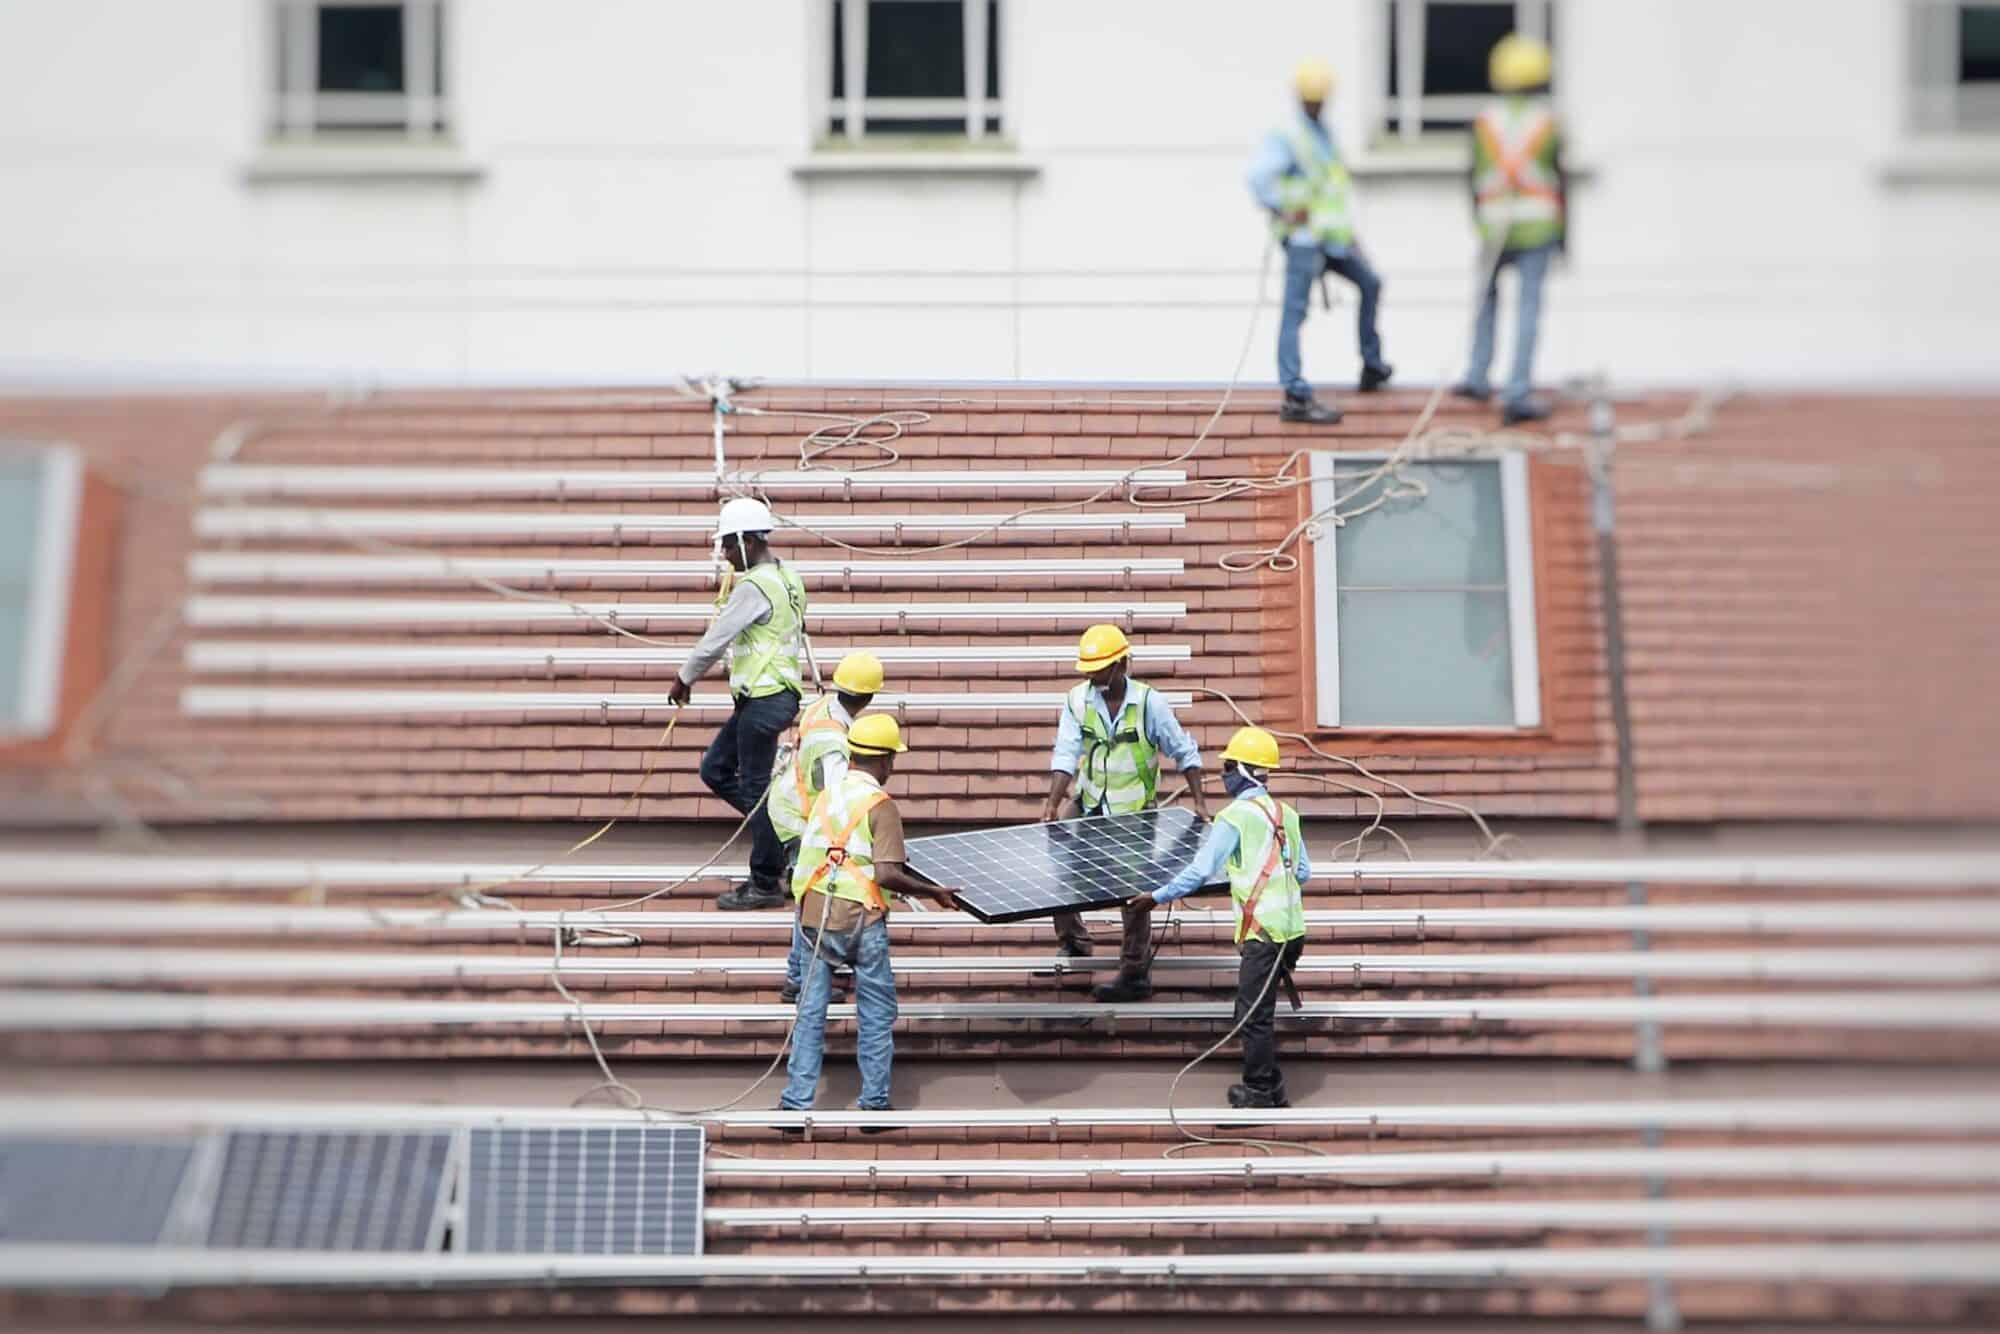 A group of workers install solar panels on residential rooftops.